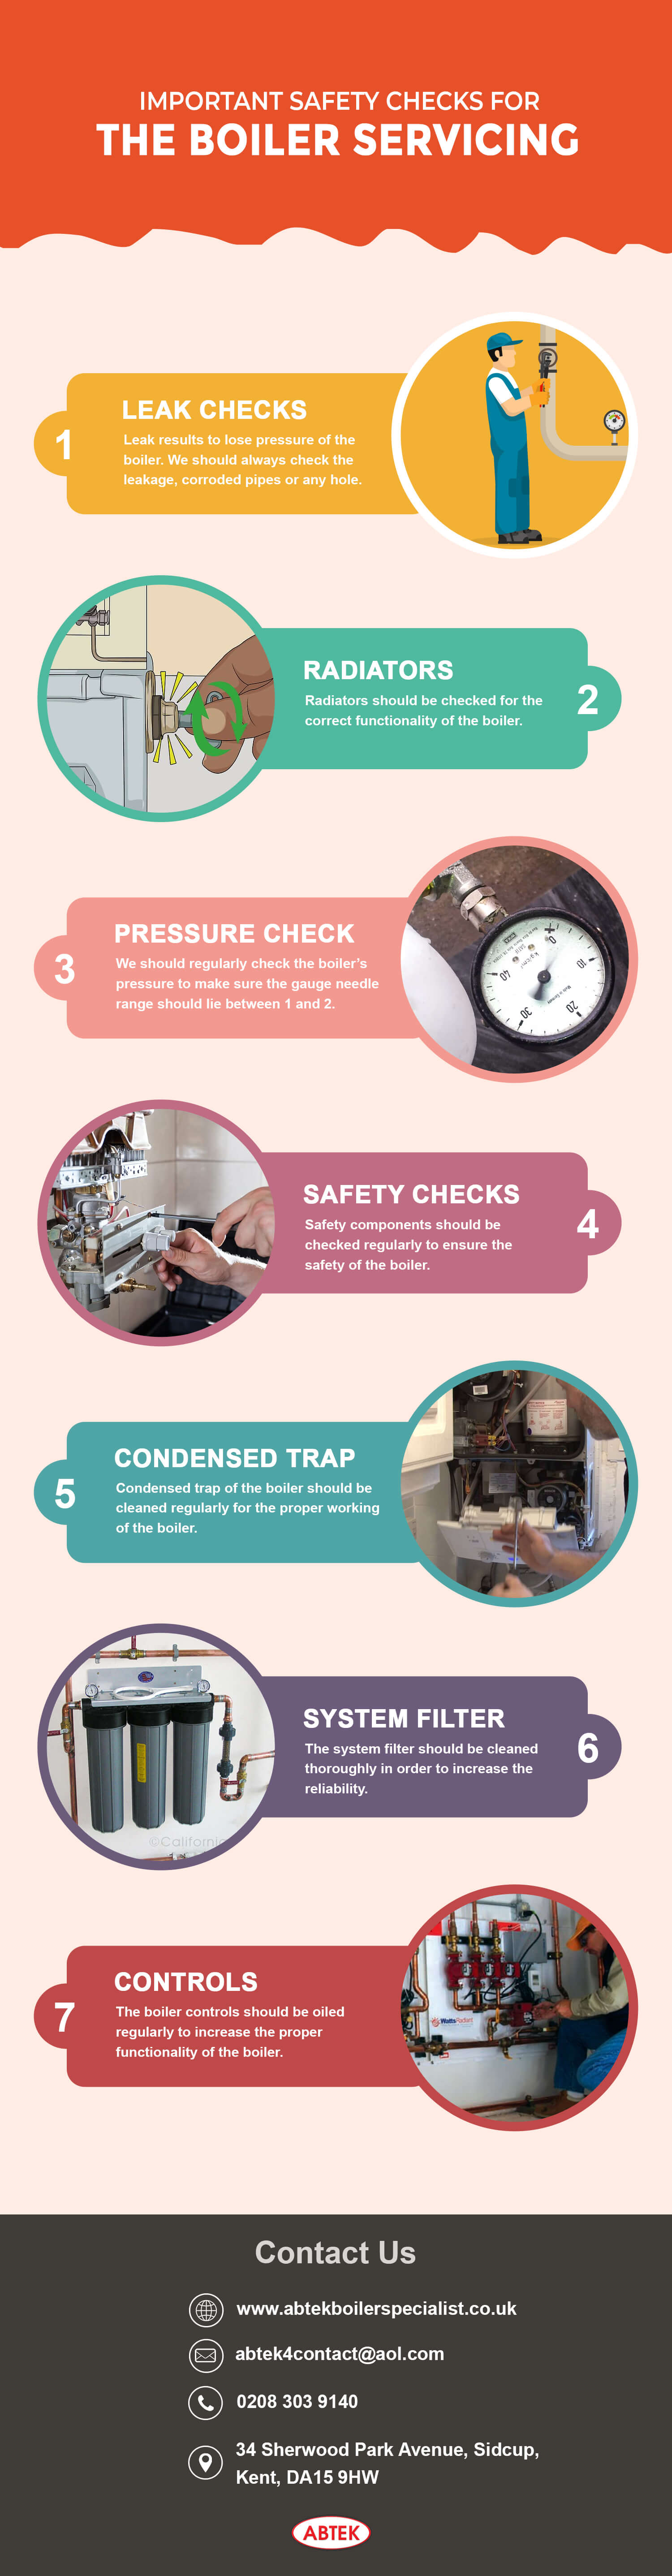 Checkout-Top-Safety-Checks-for-Boiler-Servicing-infographic-plaza